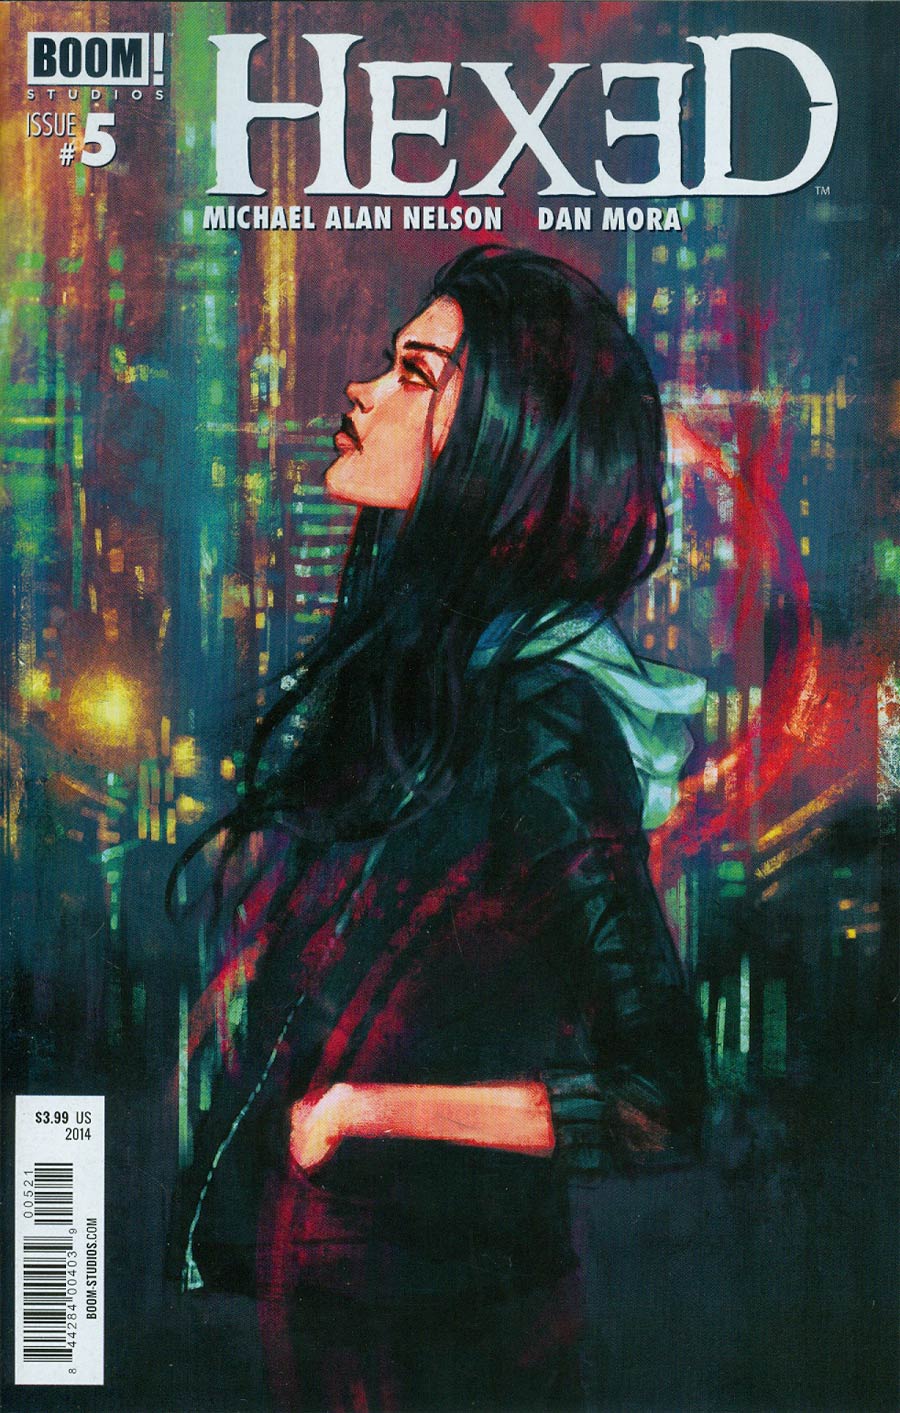 Hexed Vol 2 #5 Cover B Variant Alice X Zhang Cover